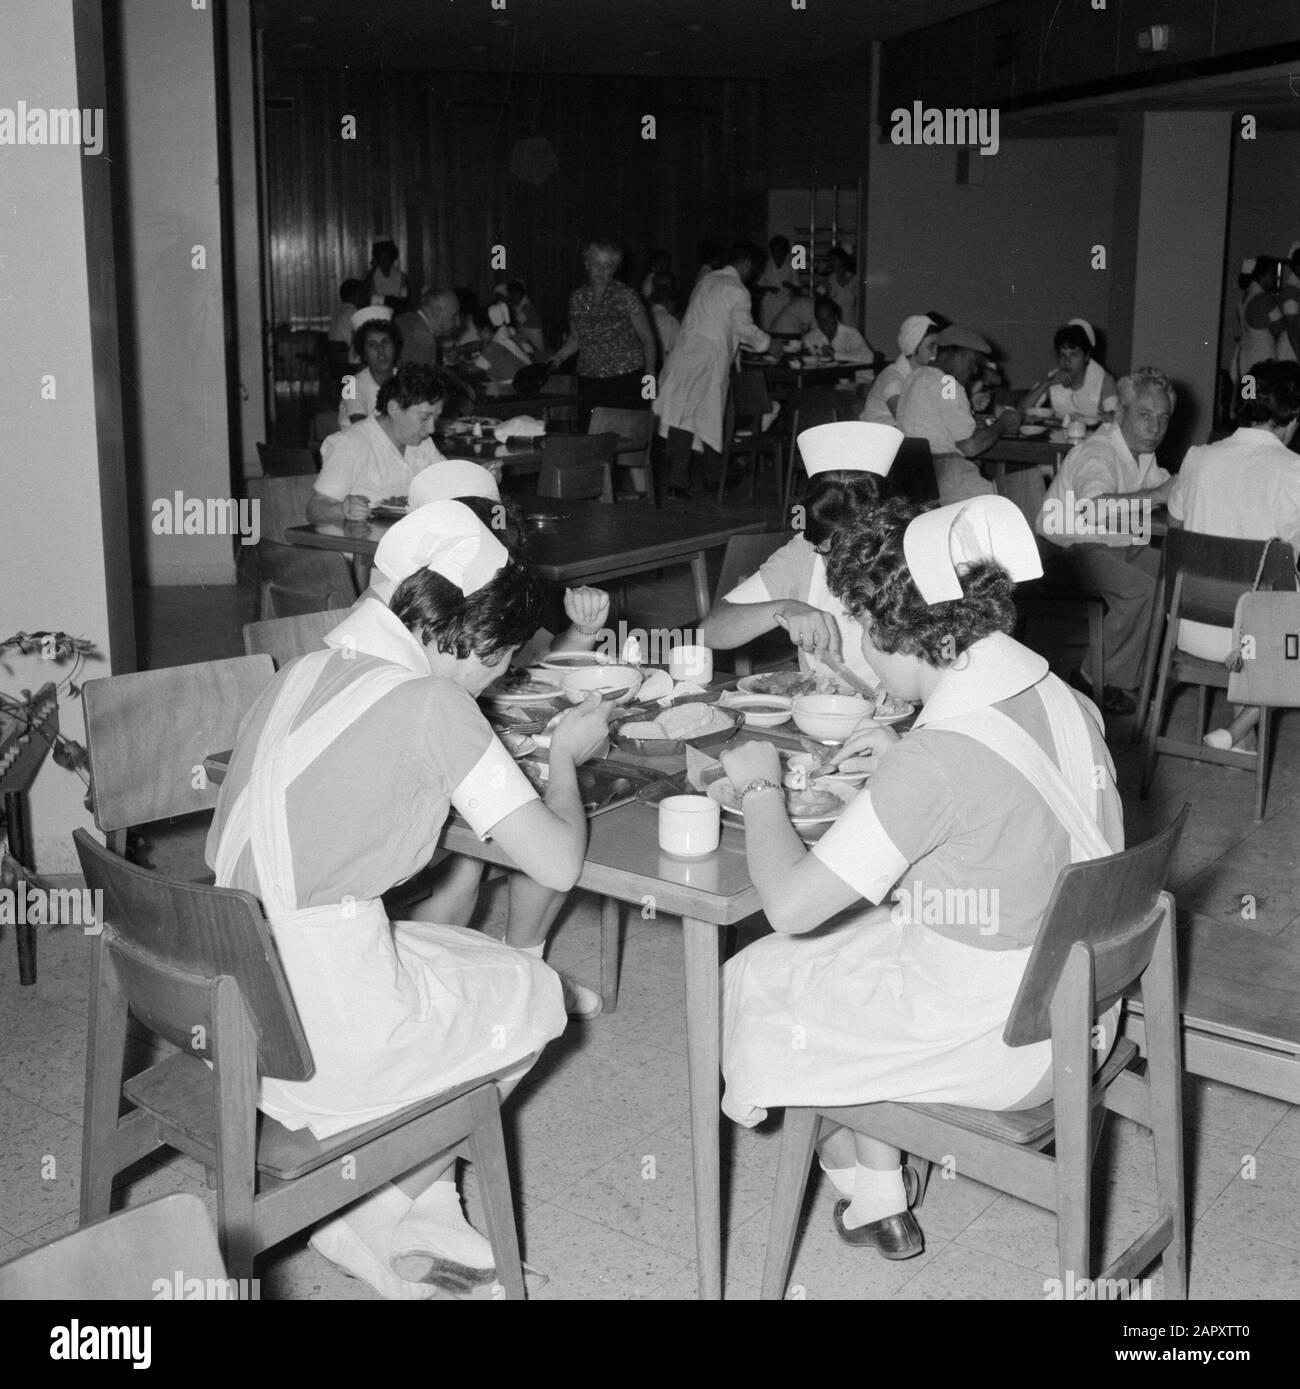 Nursing staff at the meal in the canteen of the Beilinson Hospital at Petah Tikwa Date: January 1, 1960 Location: Israel, Petach Tikwah Keywords: restaurants, chairs, uniforms, nurses, hospitals Personal name: Beilinson, Moshe Stock Photo